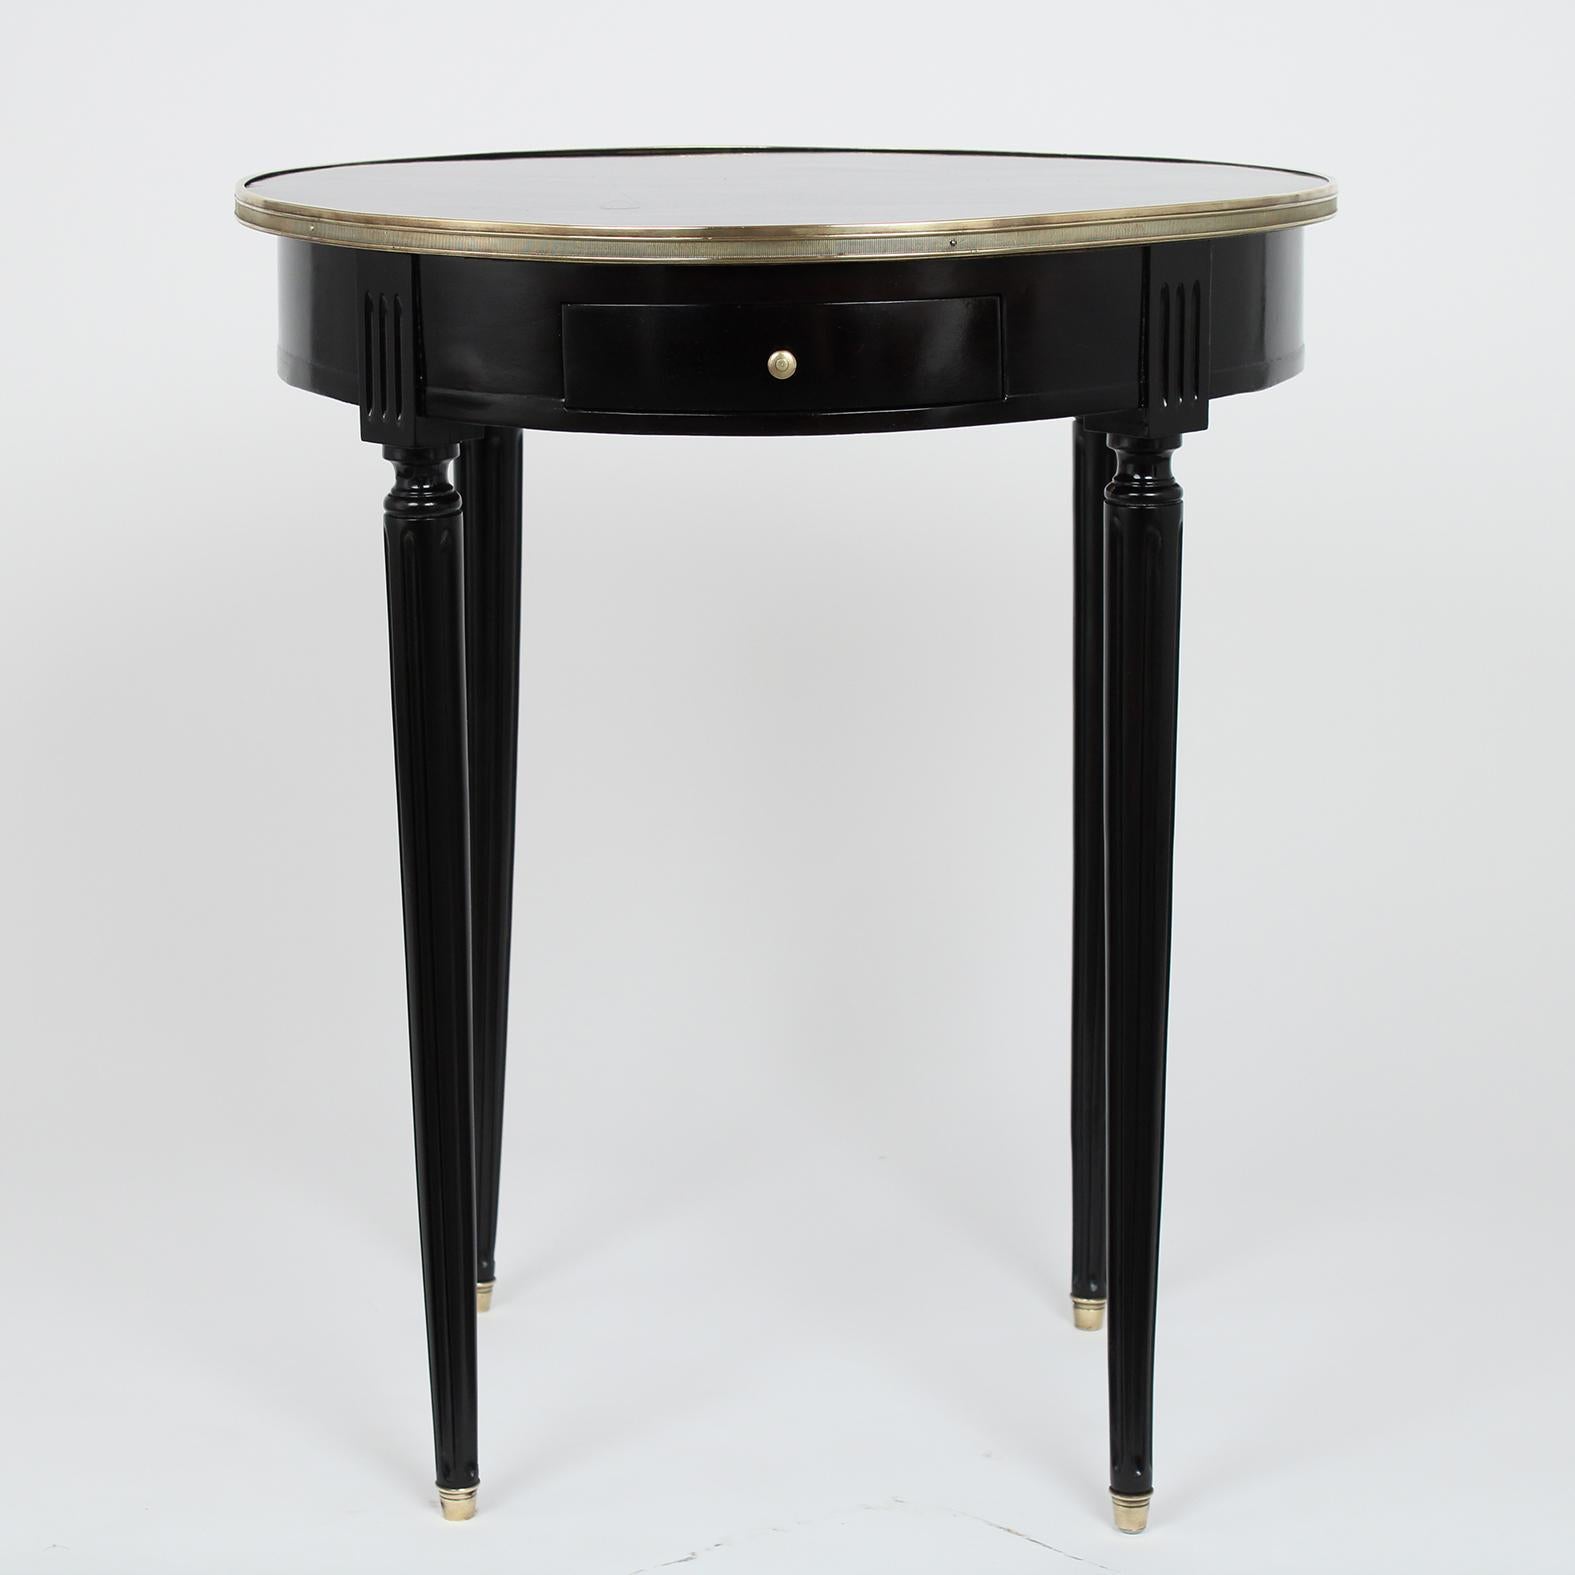 This antique French Louis XVI style side table has been restored and newly stained in an ebonized color with a lacquered finish. The top has brass molding details around the top, a single drawer with a brass knob in the front, and a small pullout